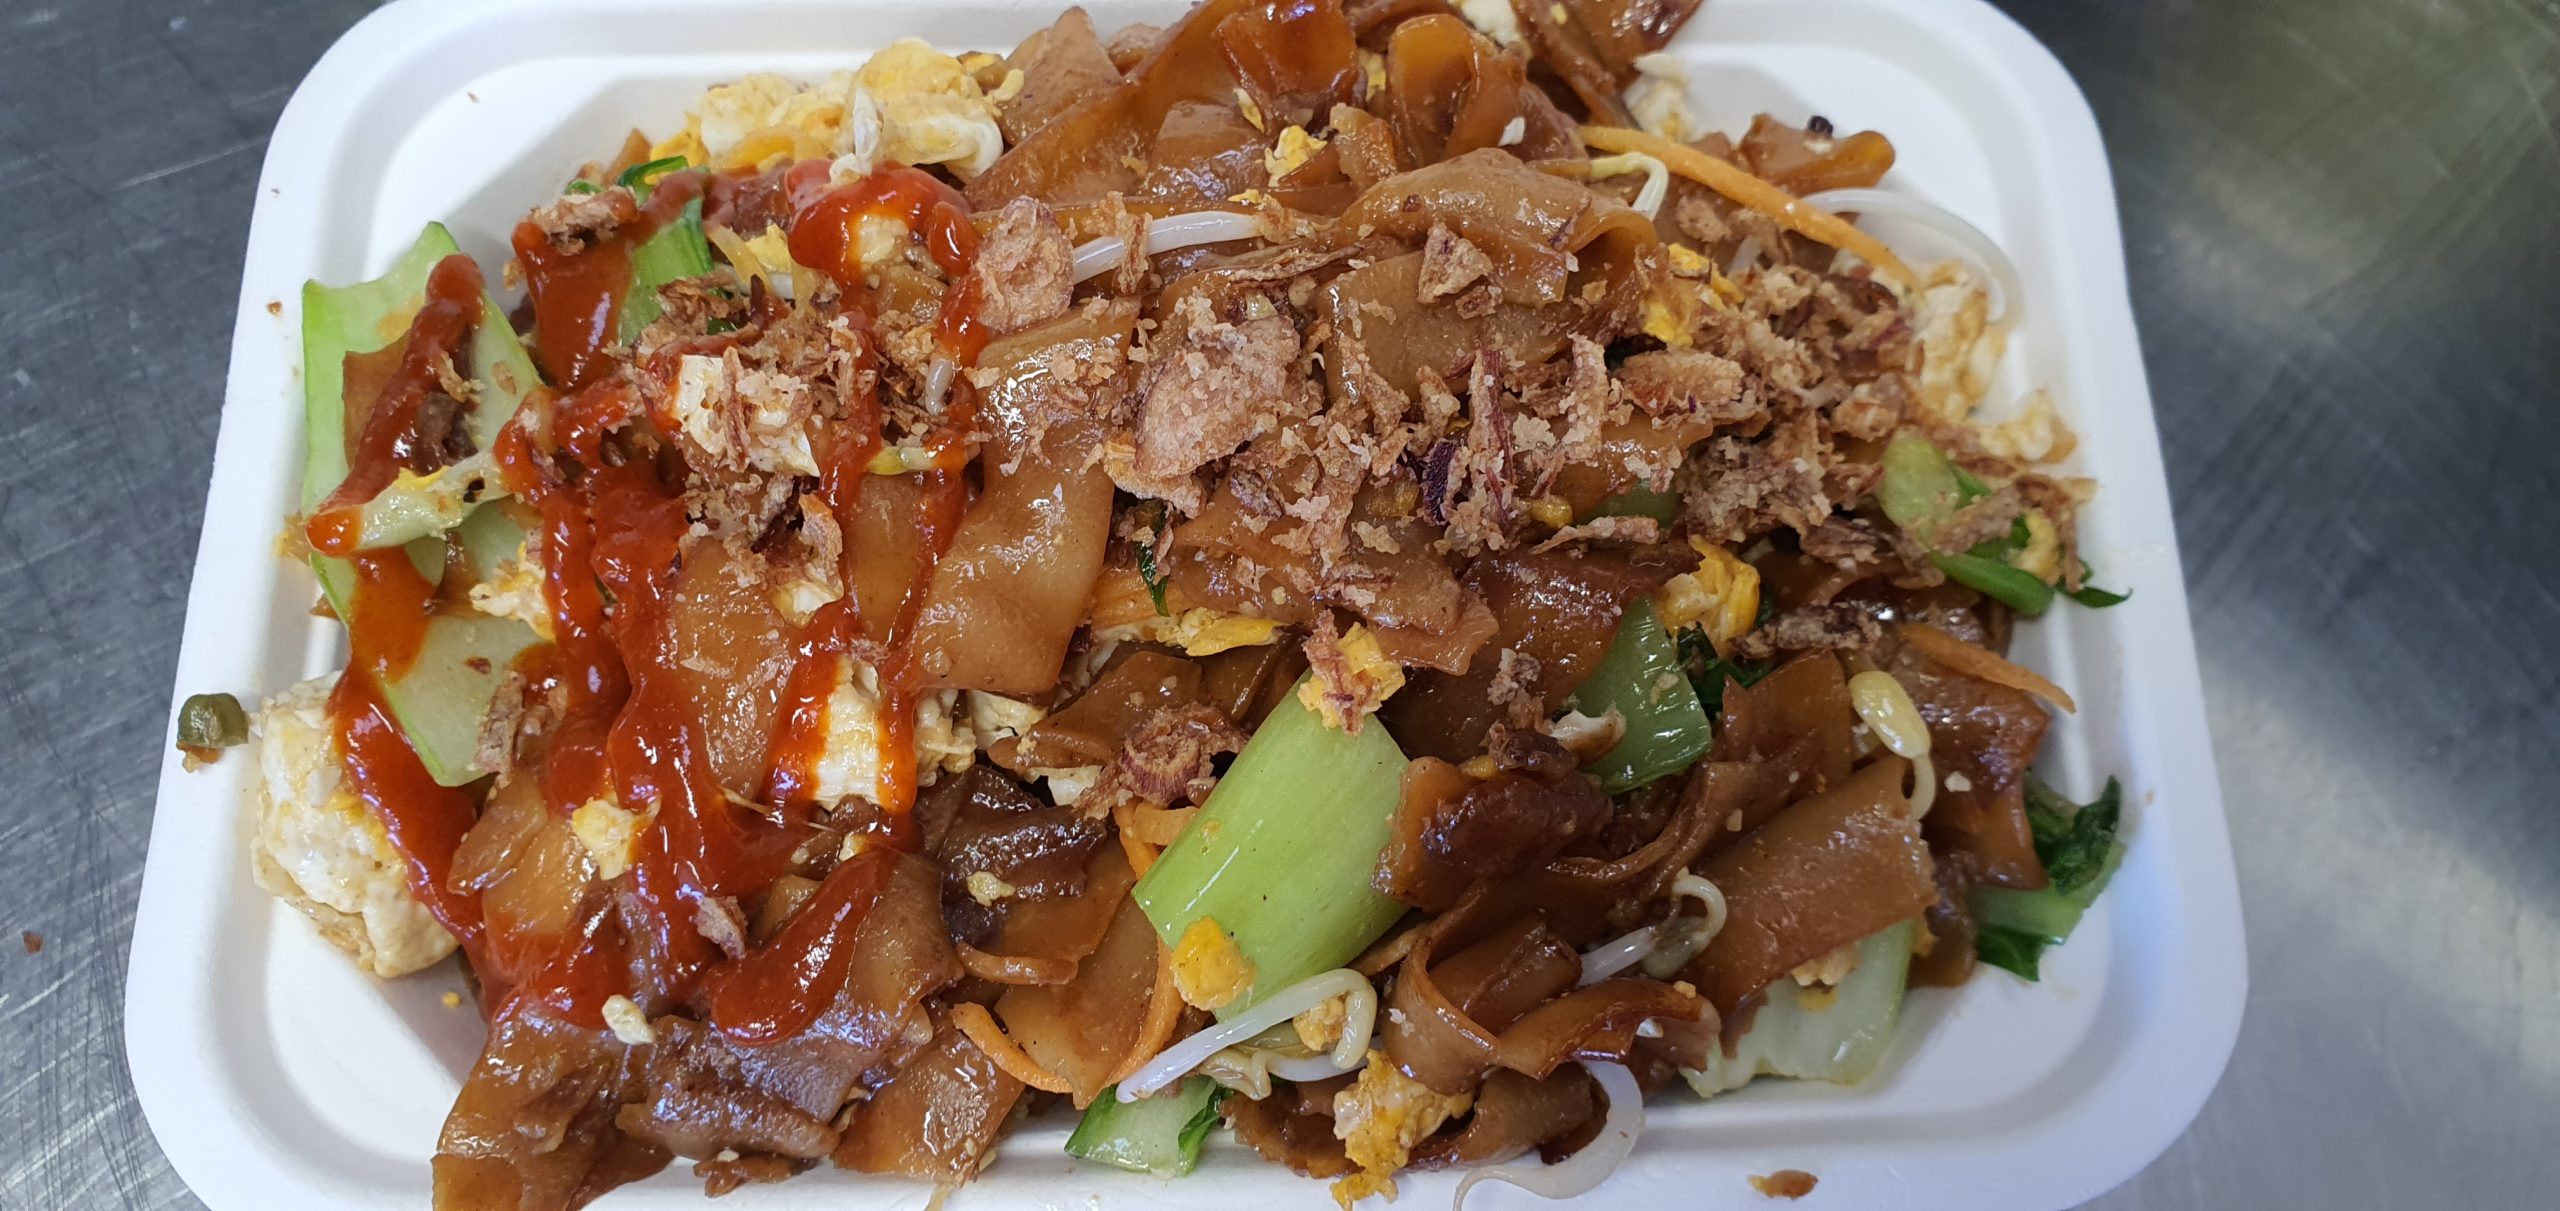 Char Keow Teow